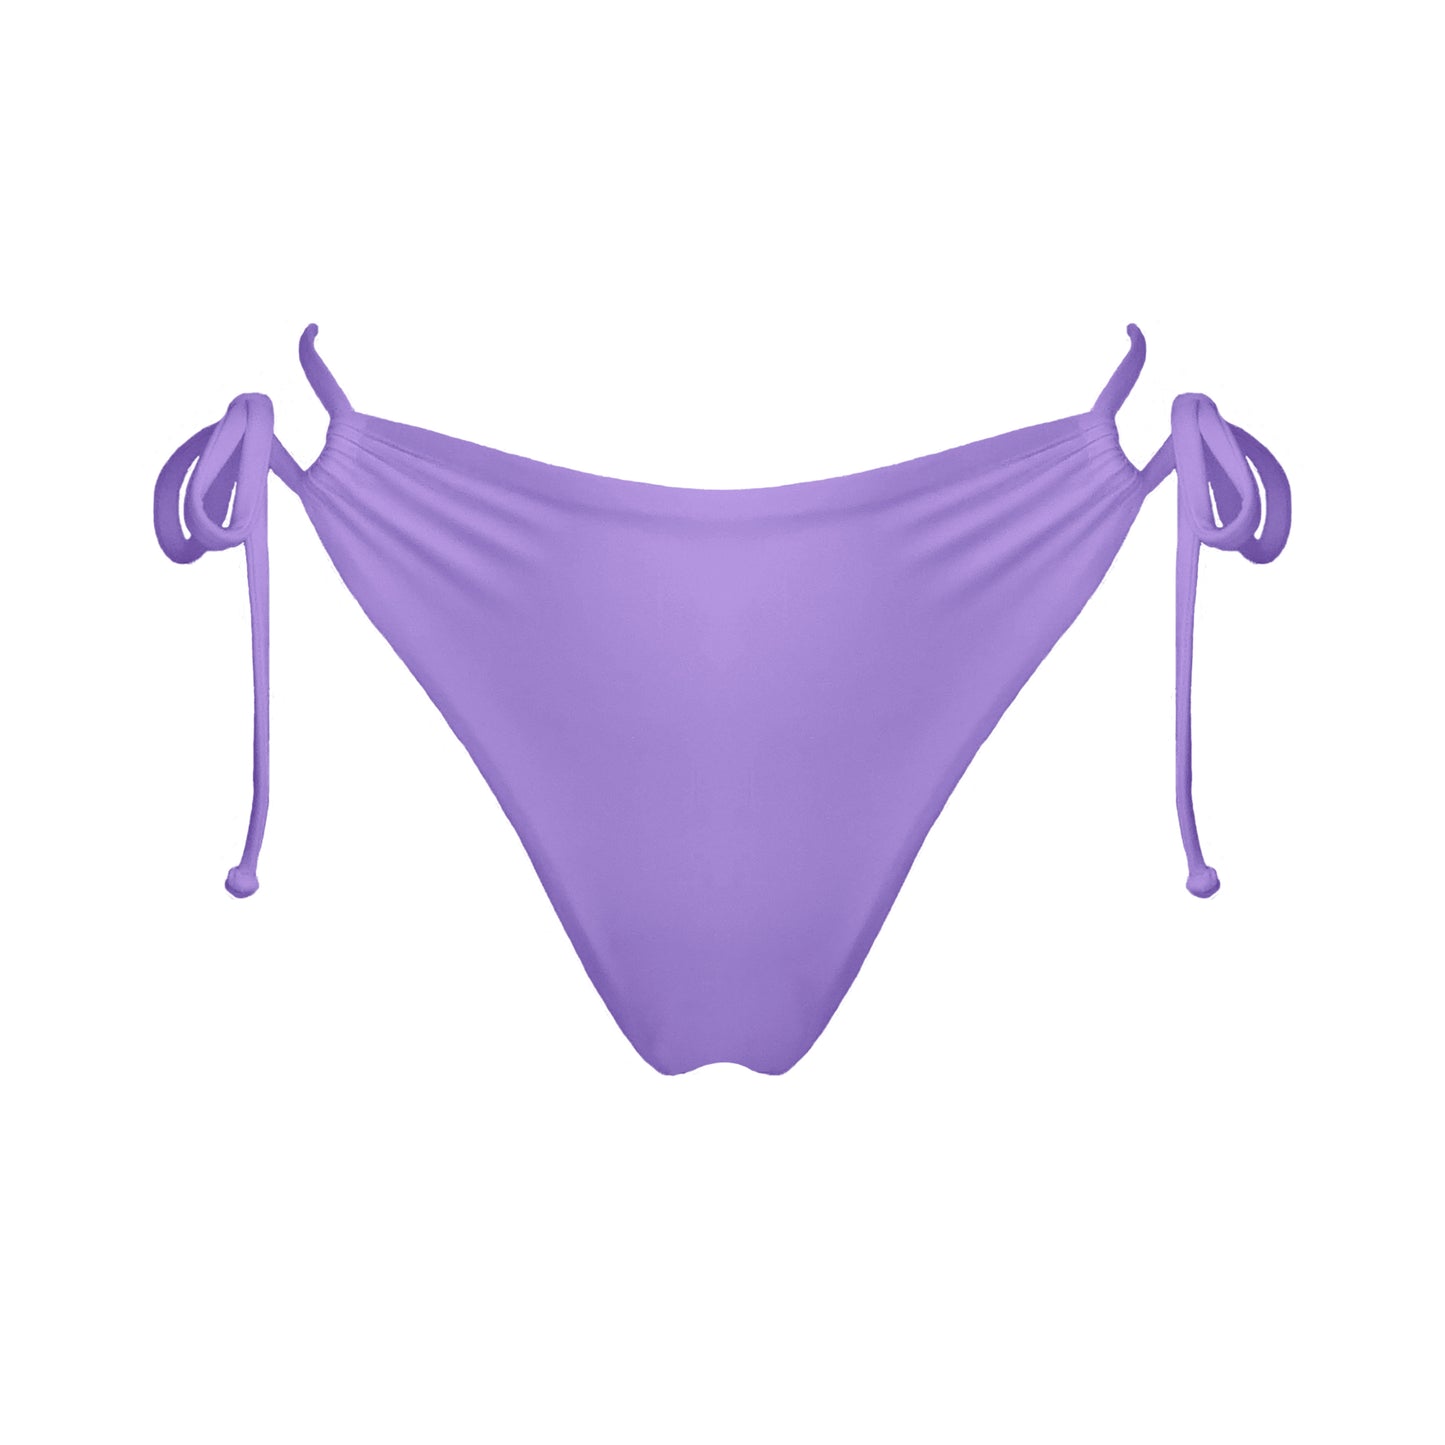 Pastel purple strappy mid-rise bikini bottoms with high cut legs and cheeky coverage.